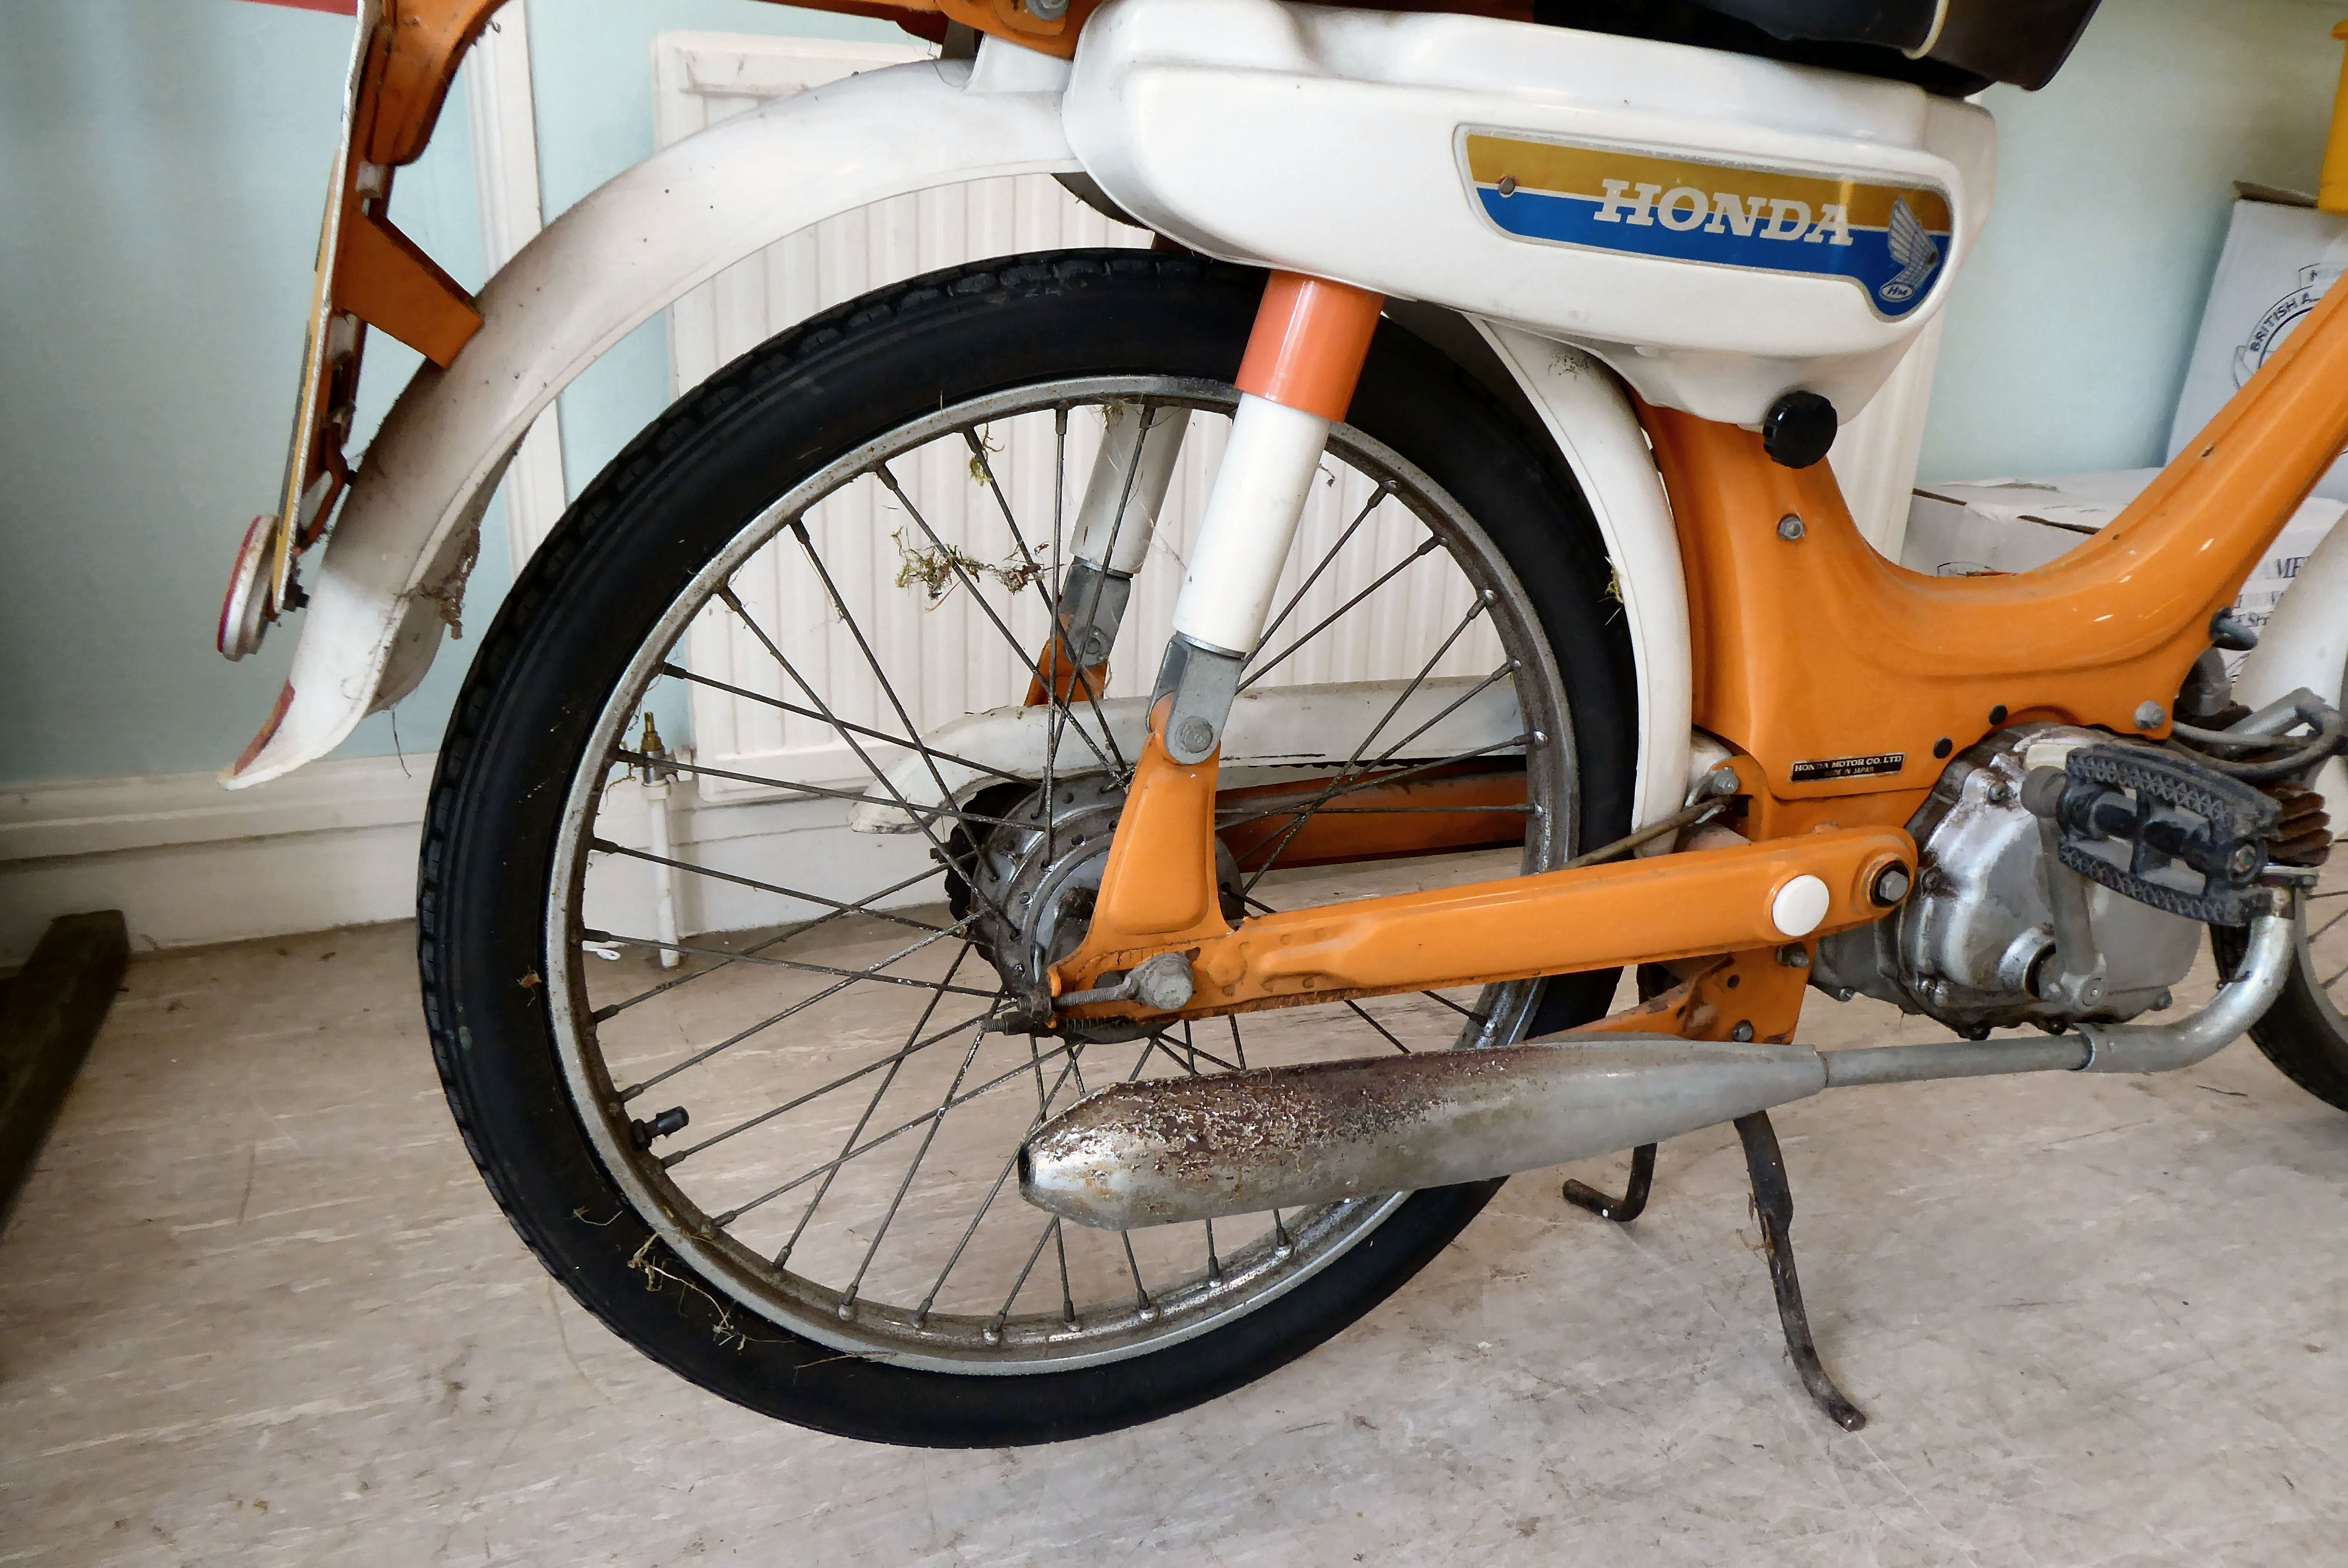 A 1975 Honda 49cc moped in orange and white livery, original registration plates for JGS 258N but no - Image 2 of 12